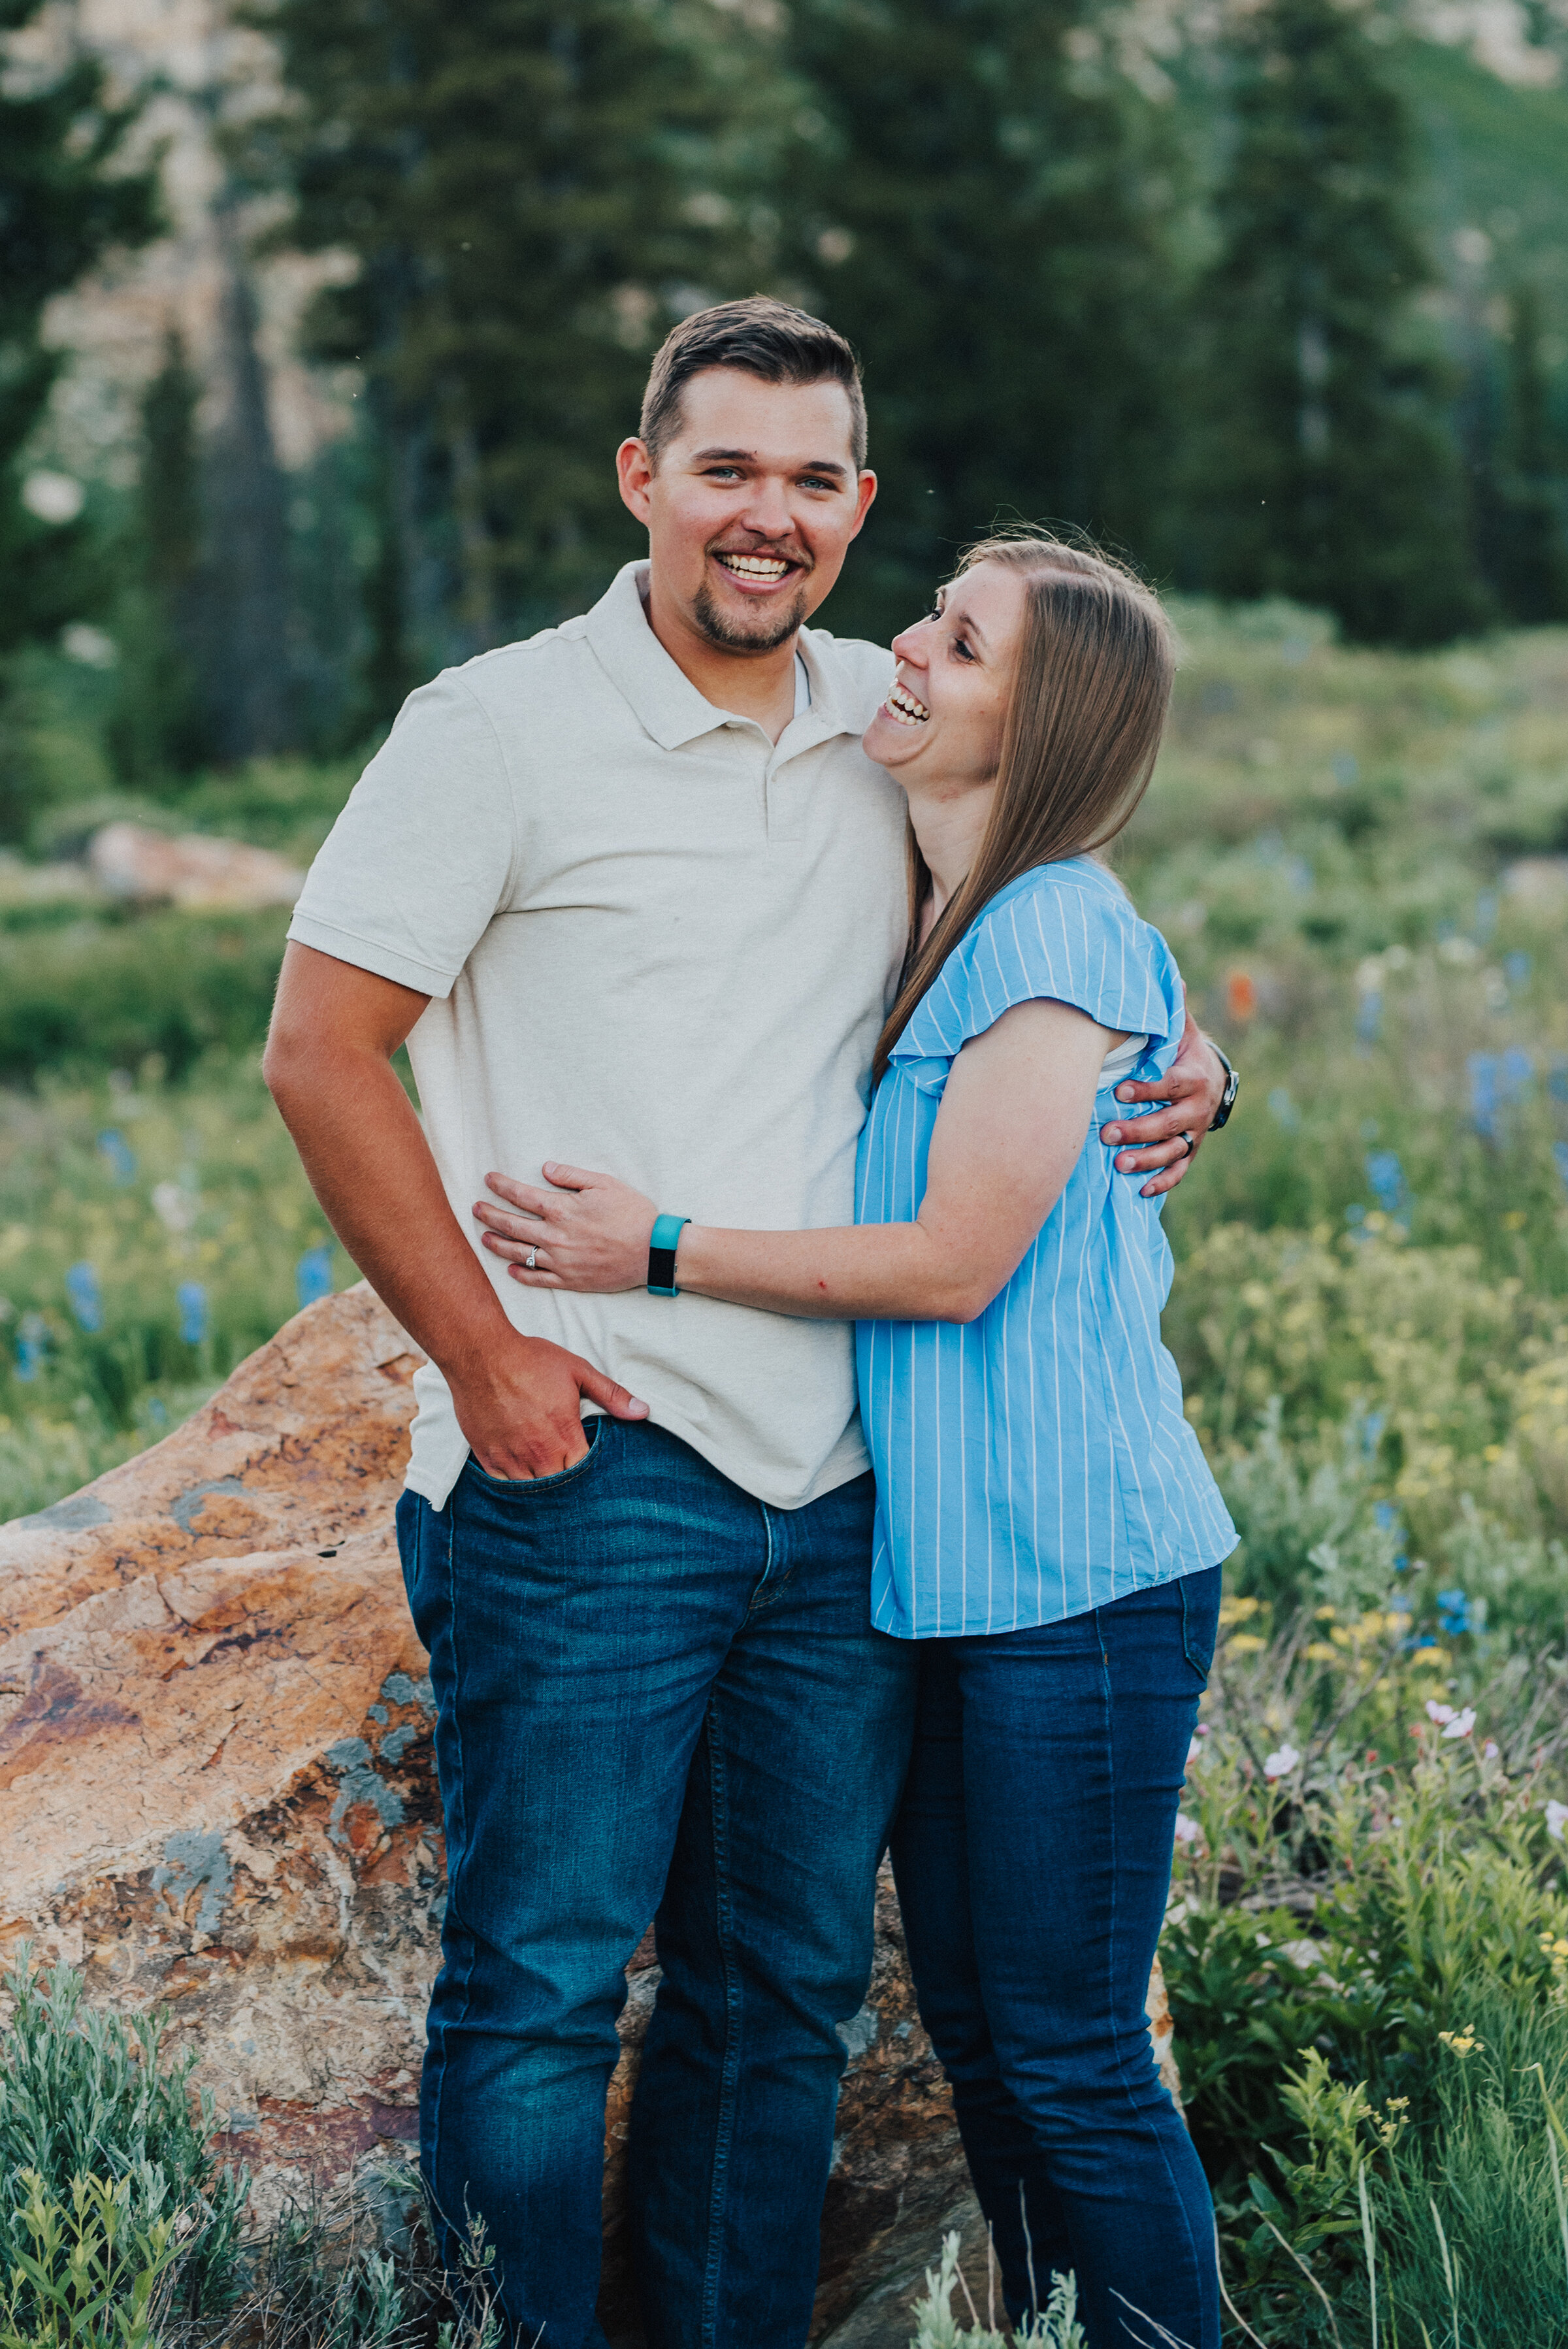  Cheerful couple during this dreamy family photoshoot up Logan Canyon at Tony Grove. Logan Utah family photographer Kristi Alyse photography Tony Grove forest nature photos Logan canyon light blue family photos wild flowers grand parents children parents spouses reunited dreamy scenic photo shoot #kristialysephotography #utahphotographer #familyphotography #logancanyon #familyphotos #forest #wildflowers #northernutah #familyportraits #family 